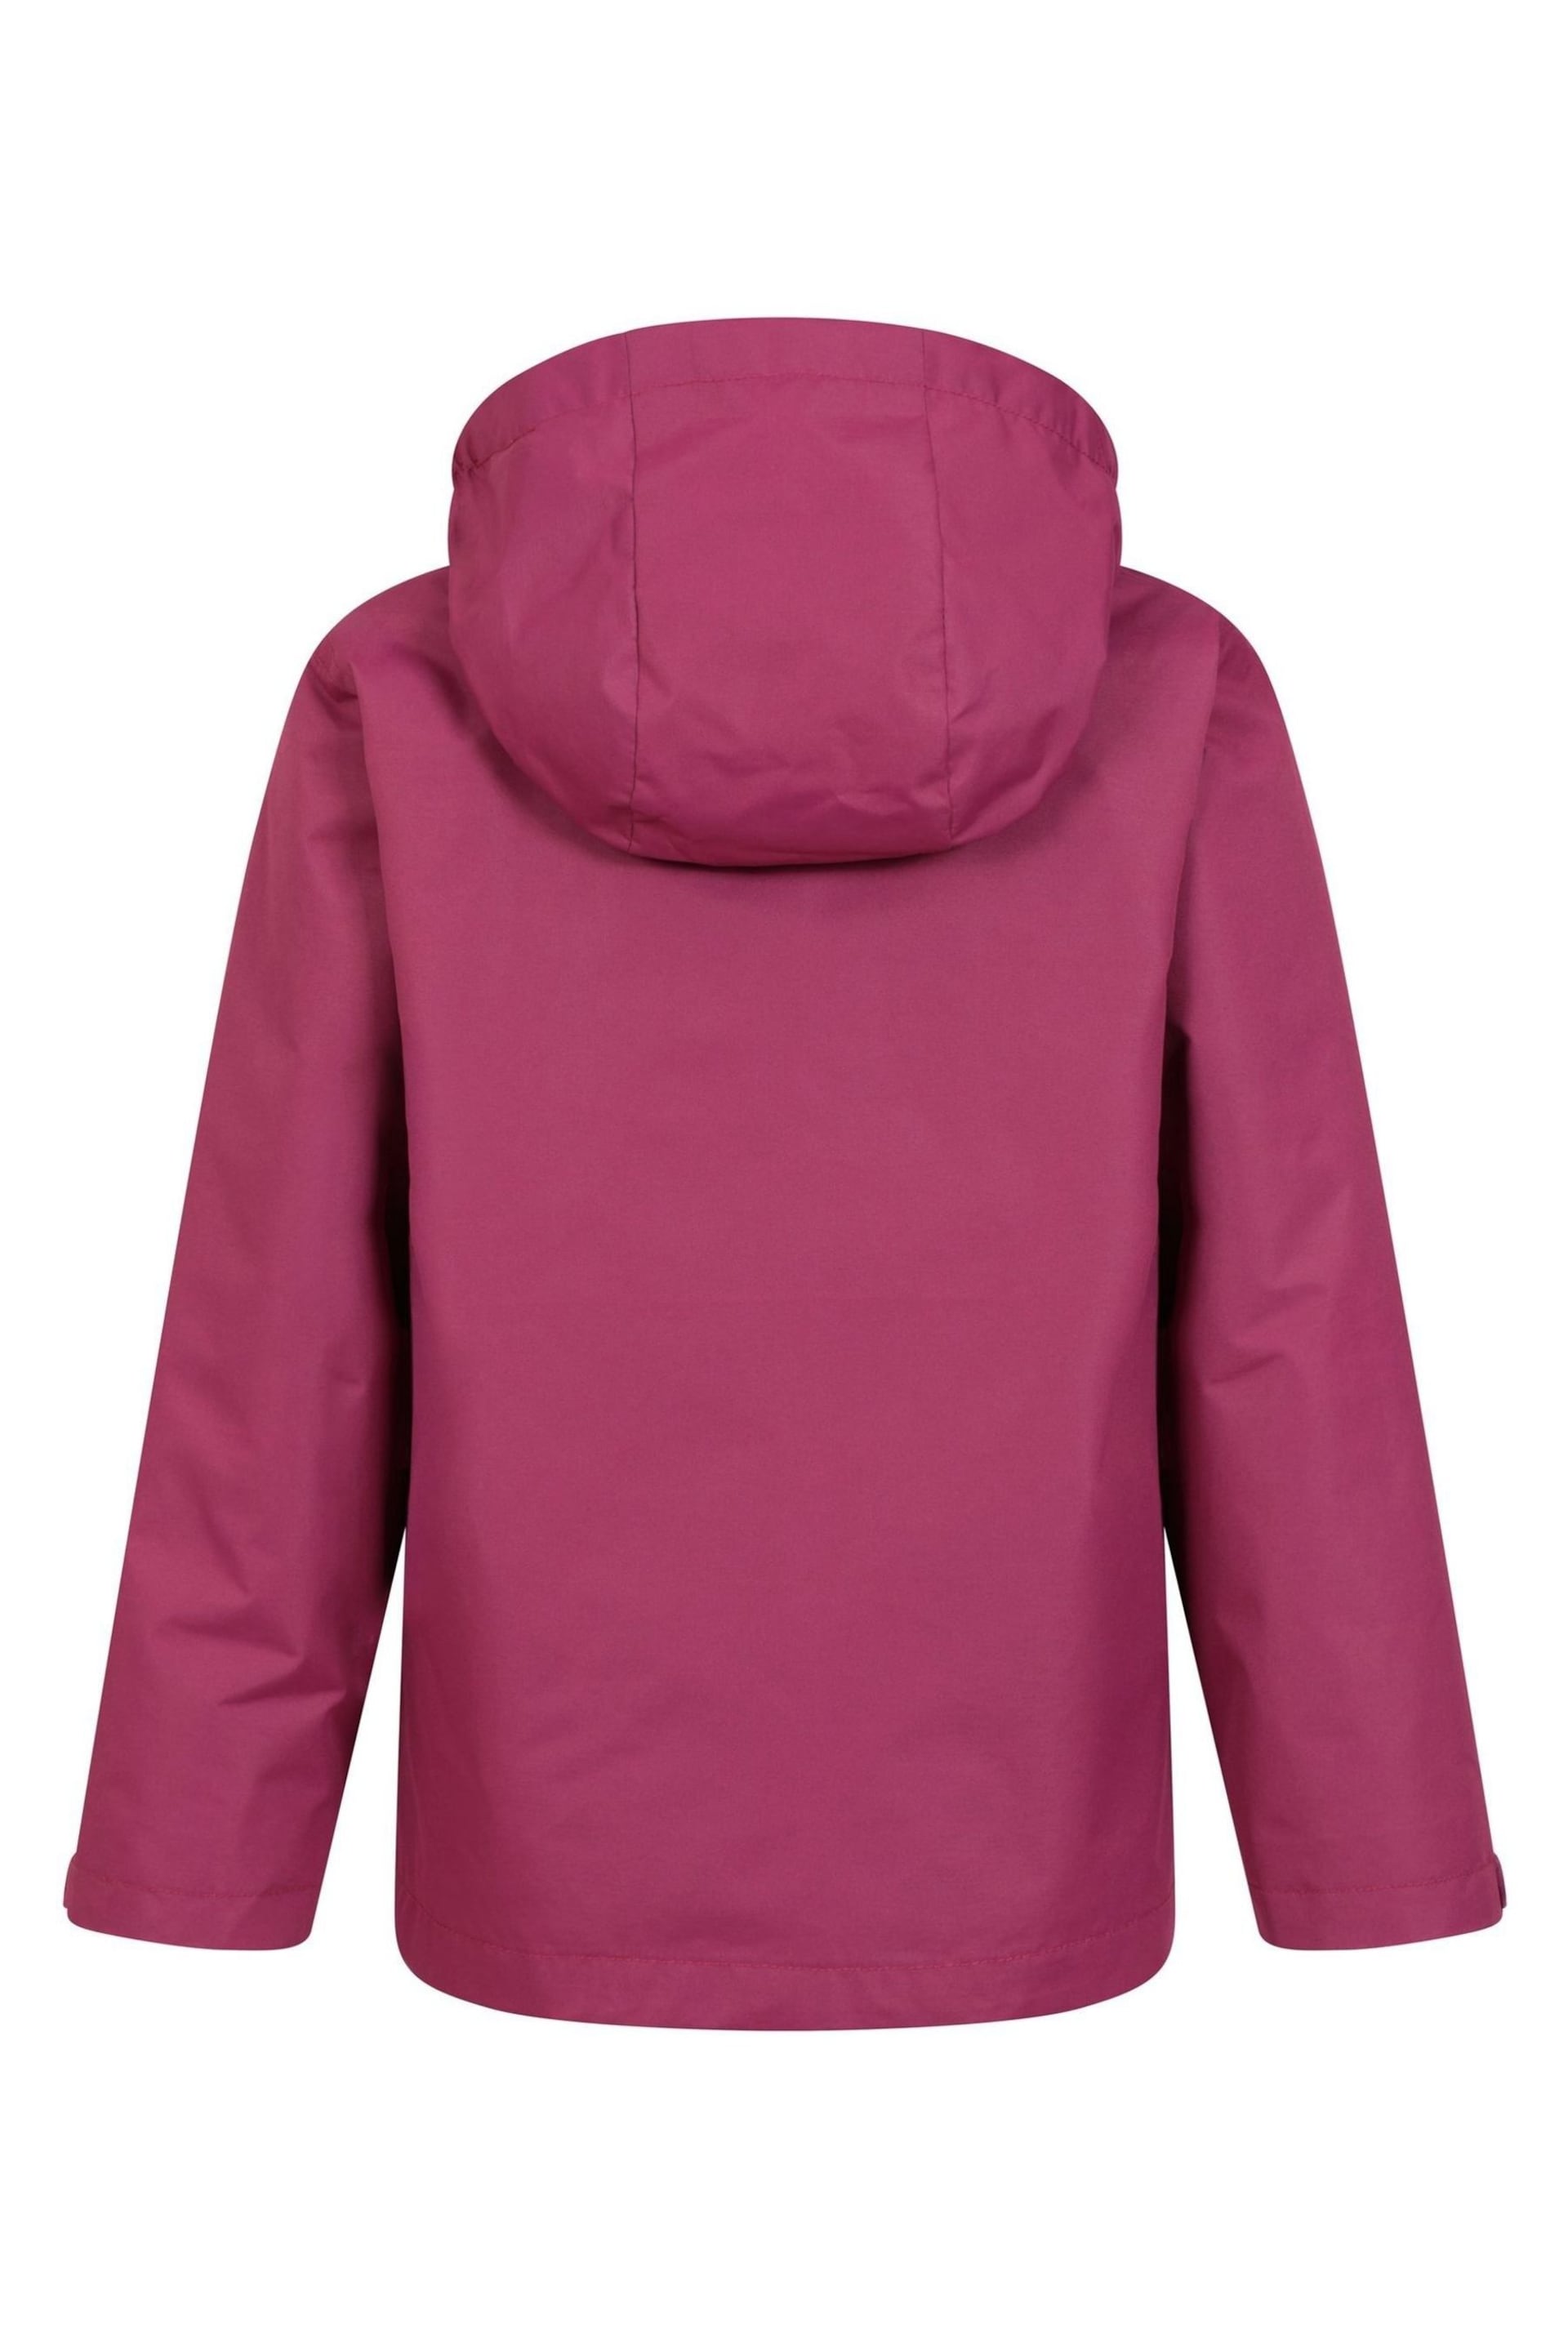 Mountain Warehouse Red Fell Kids 3 In 1 Water Resistant Jacket - Image 3 of 5